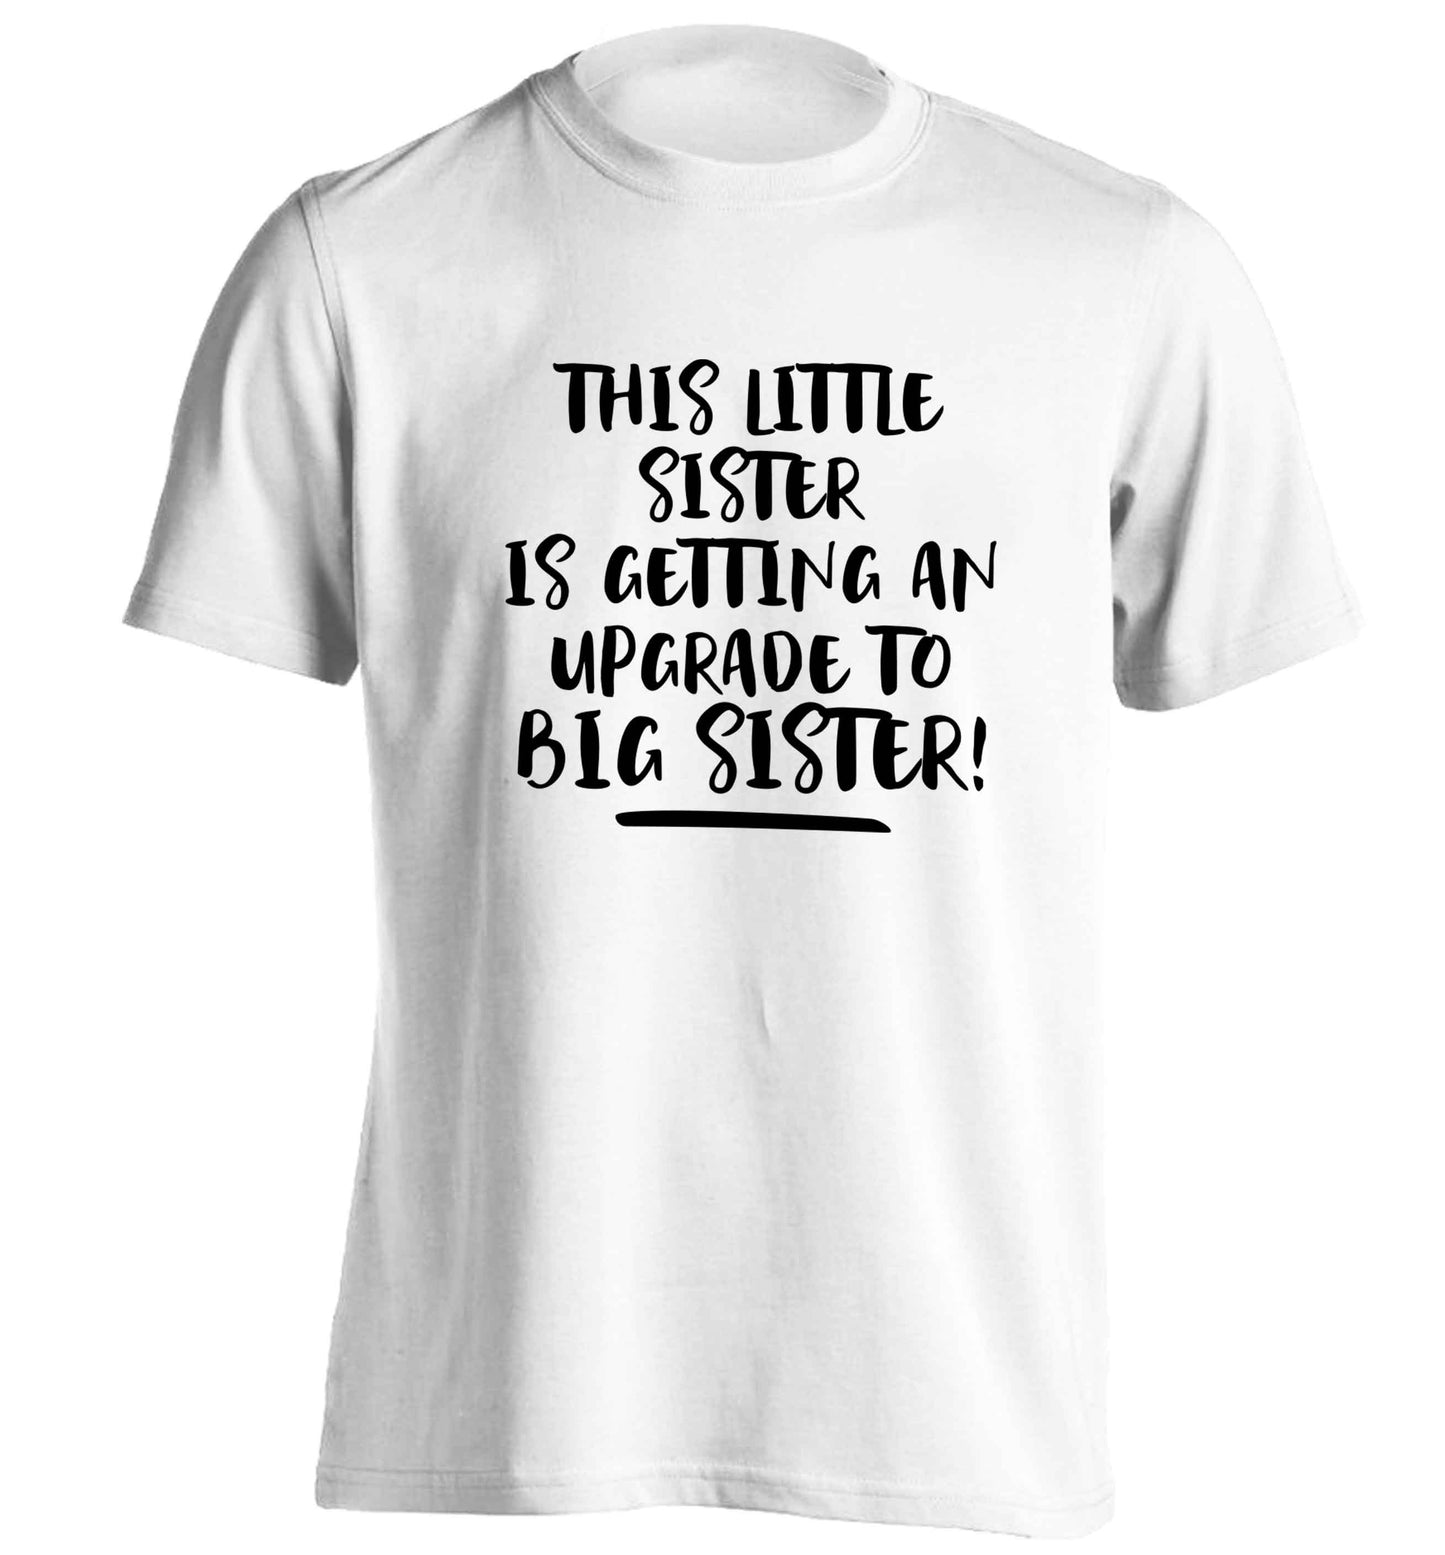 This little sister is getting an upgrade to big sister! adults unisex white Tshirt 2XL